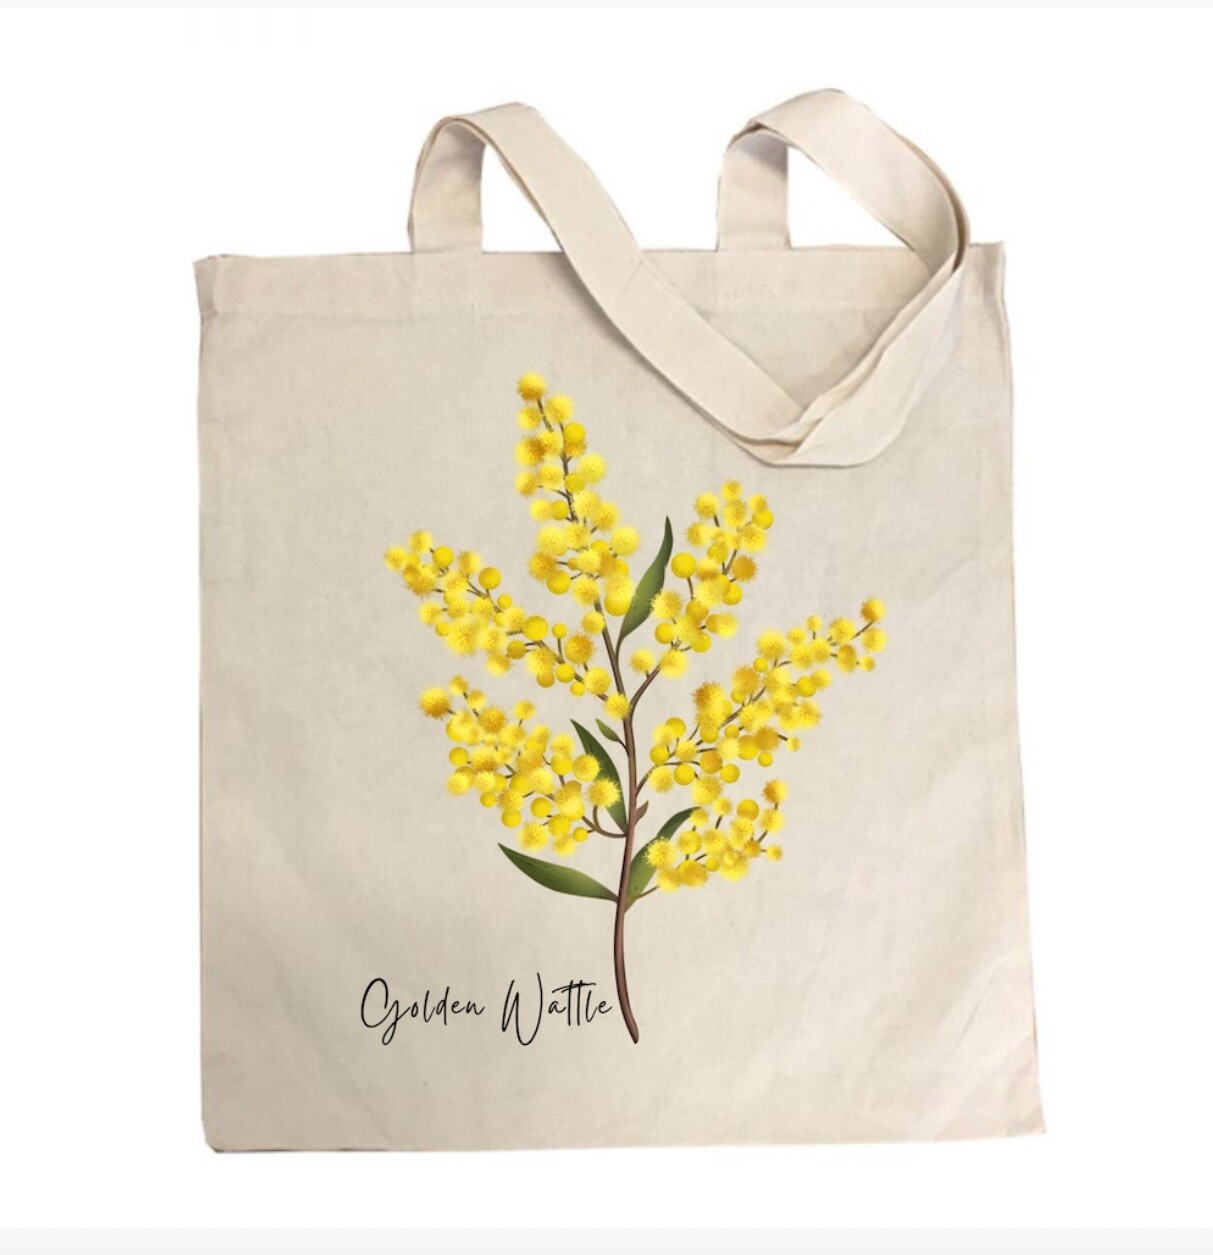 TAYLOR HILL - Tote Bag Cotton -  Golden Wattle